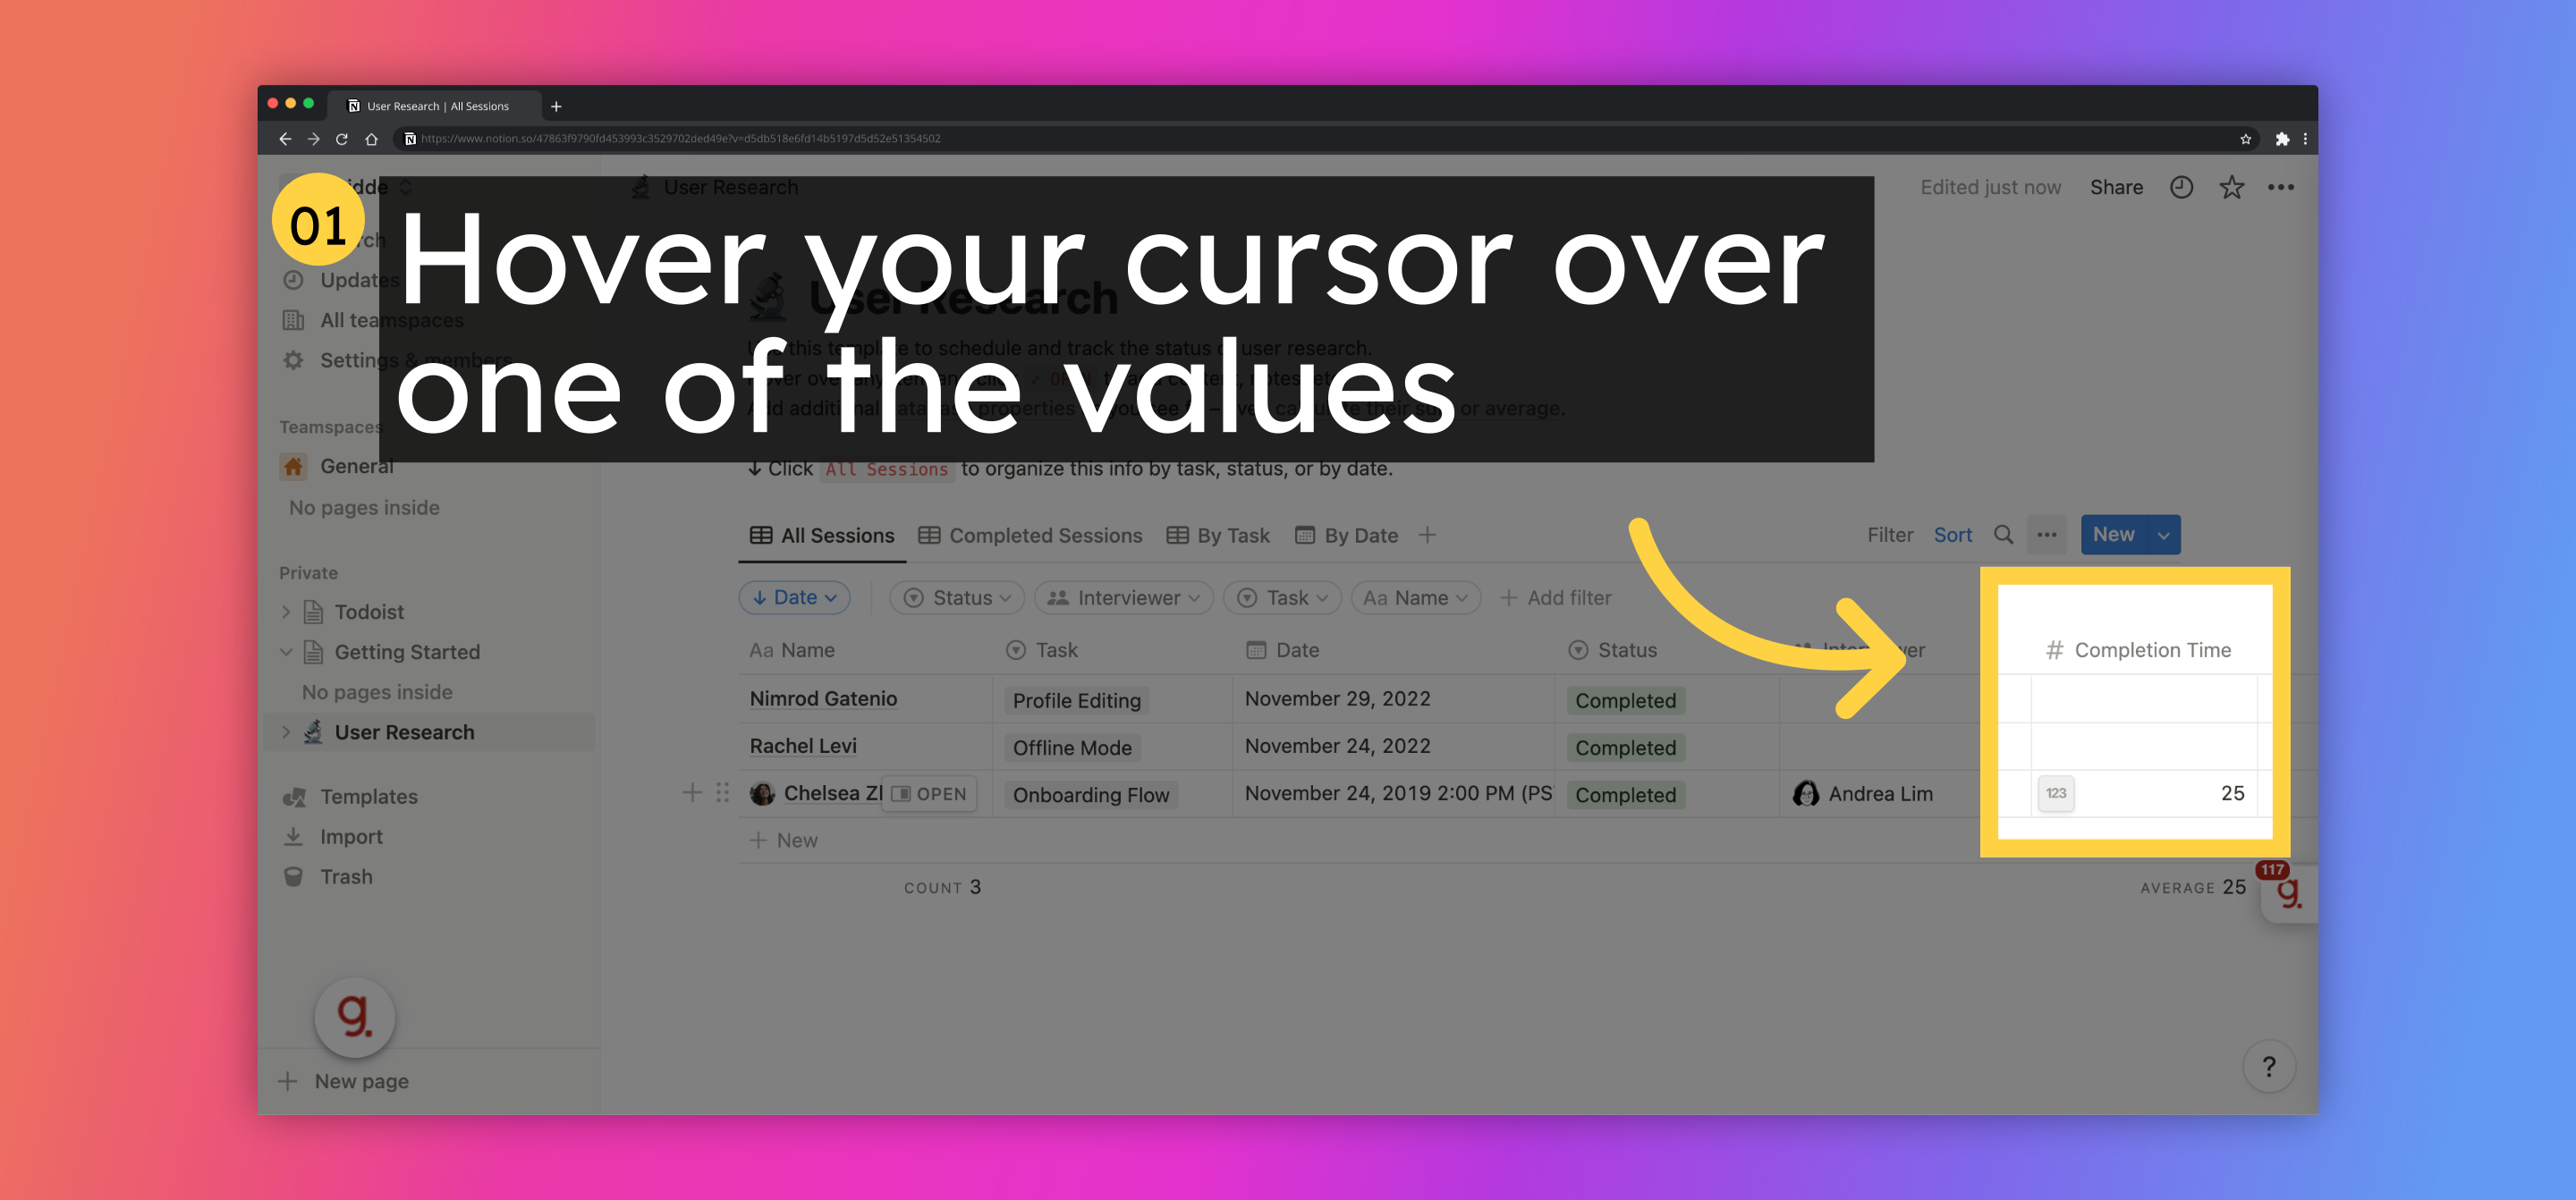 Hover your cursor over one of the values